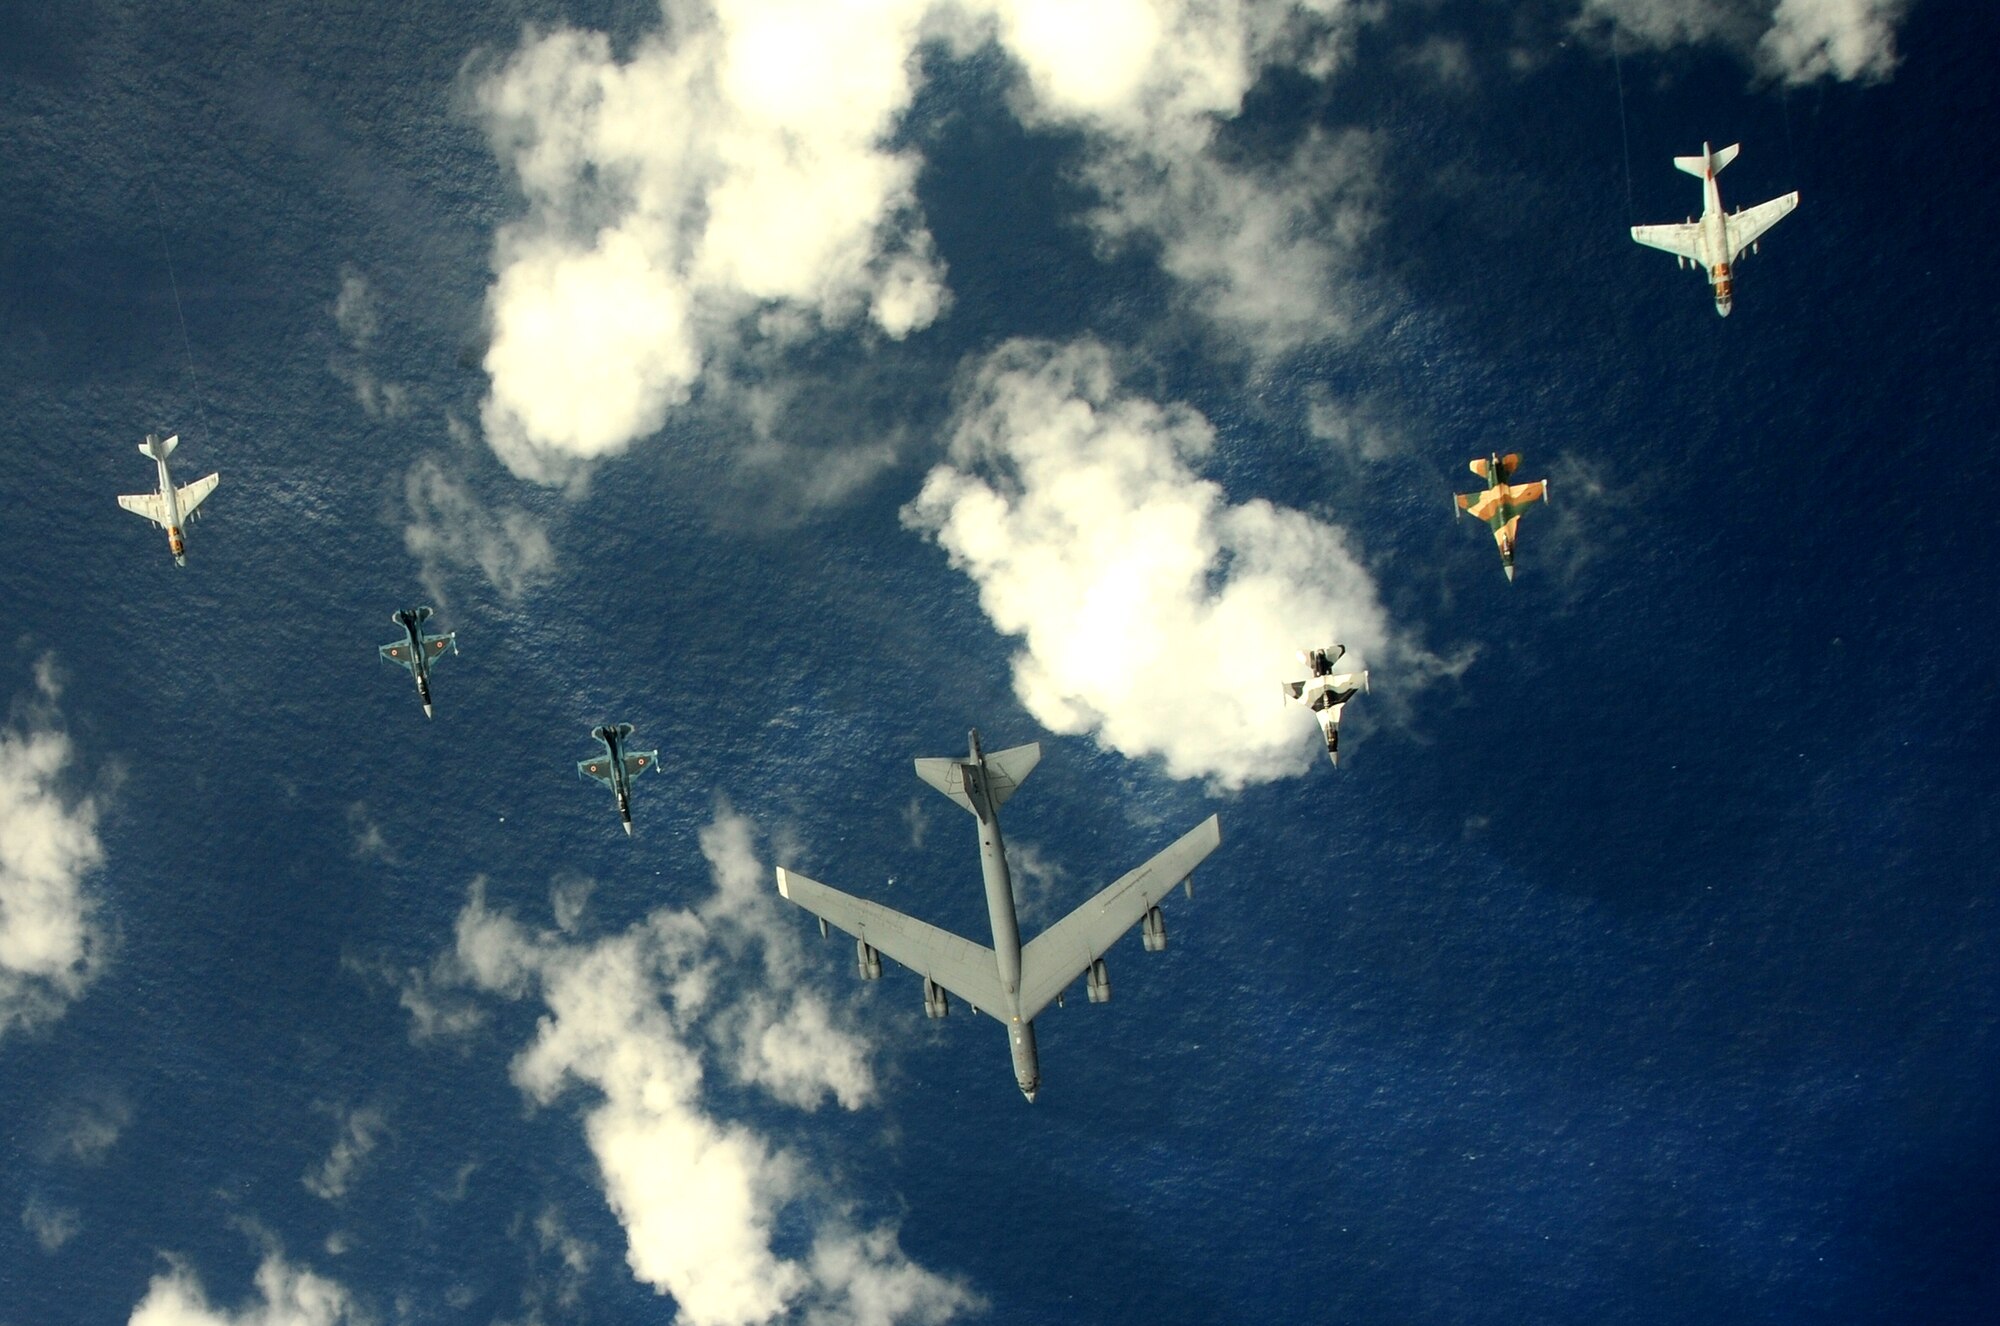 A B-52 Stratofortress currently deployed to Andersen AFB, Guam from the 23rdExpeditionary Bomb Squadron, leads a formation Feb. 10 of Japanese Air Self Defense Force F-2s from the 6th Squadron, Tsuiki Air Base, USAF  F-16 Fighting Falcons from the 18th Aggressor Squadron, Eielson Air Force Base, Alaska, and Navy EA-6B Prowlers from VAQ-136 Carrier Air Wing Five, Atsugi, Japan over Guam during Cope North 09-1 at Andersen Air Force Base from Feb. 2-13 The Cope North exercise is one of the longest-running series of exercises in the Pacific theater.  Since the first Cope North exercise in 1978, thousands of American and Japanese personnel have honed skills that are vital to maintaining a high level of readiness. This will be the tenth time the United States and Japan have held a Cope North exercise on Guam, and it will be the fourth time that the JASDF will use live ordnance.(U.S. Air Force photo/ Master Sgt. Kevin J. Gruenwald) released      